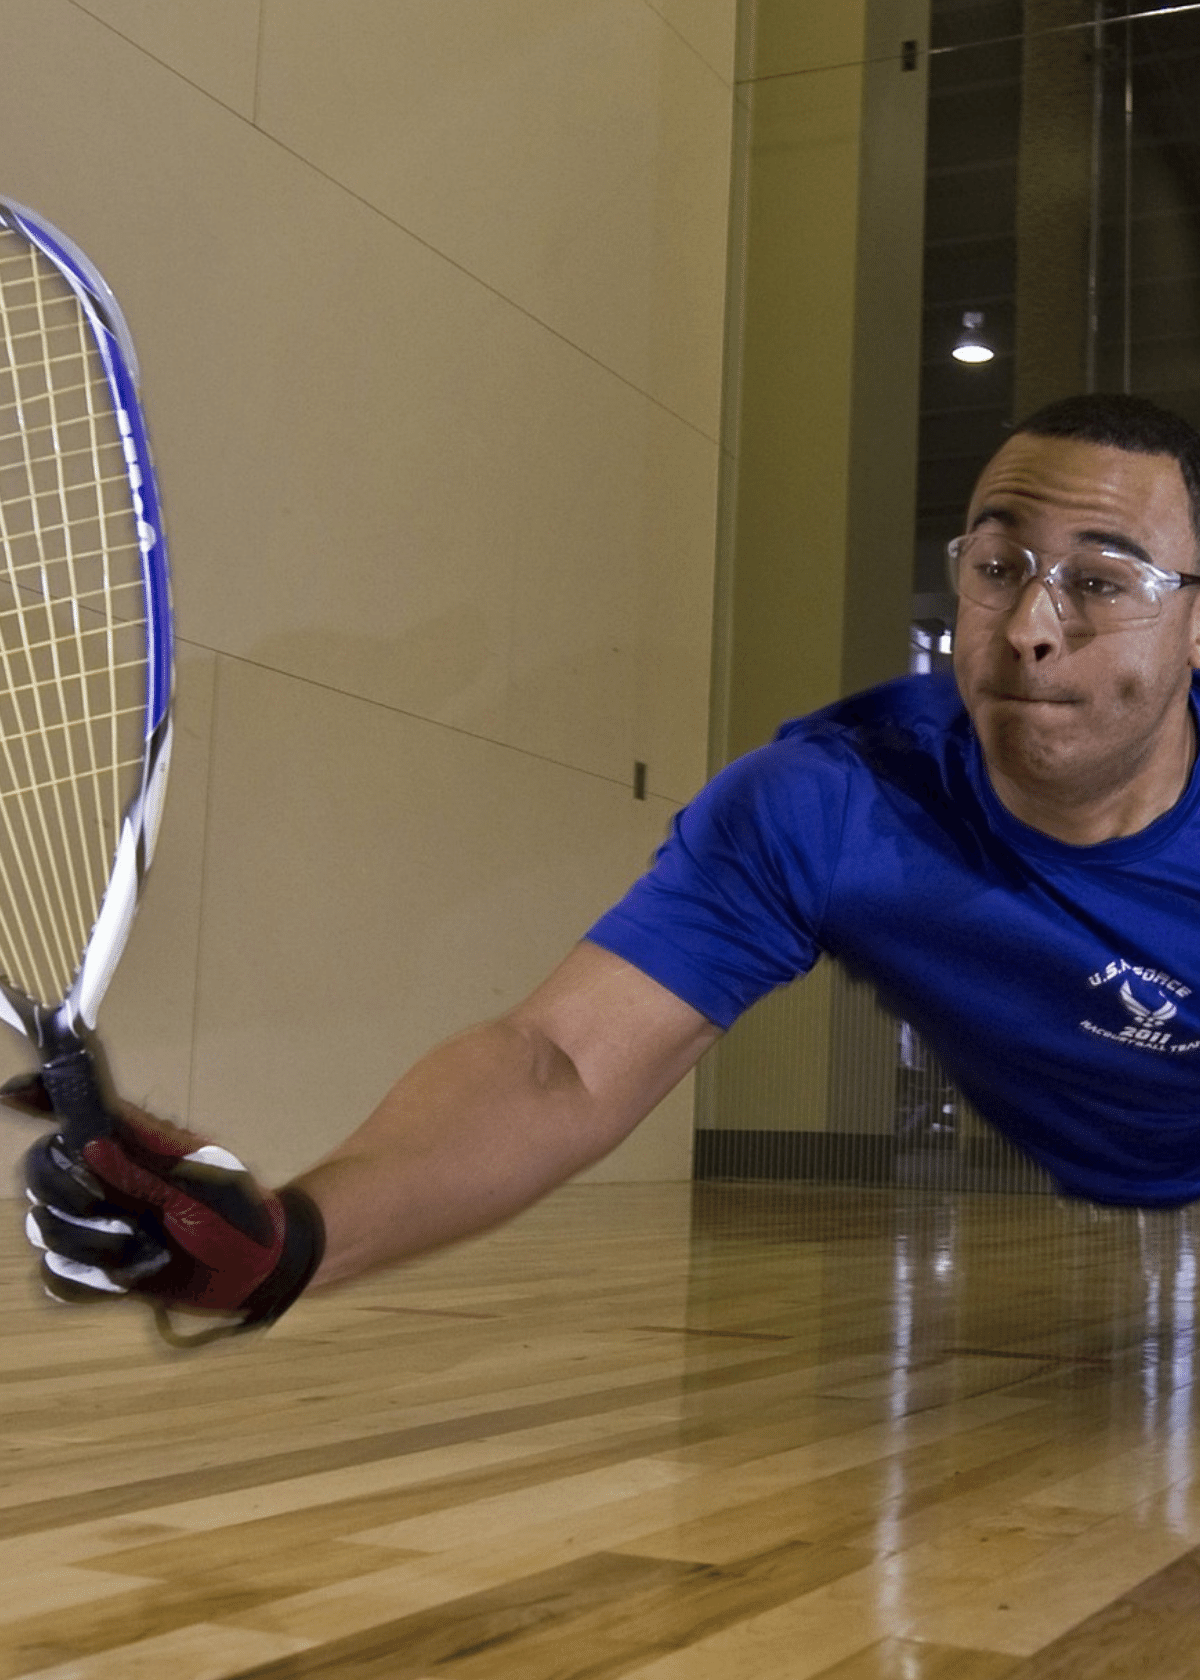 Get Hit in the Eyes Less with the Best Racquetball Goggles